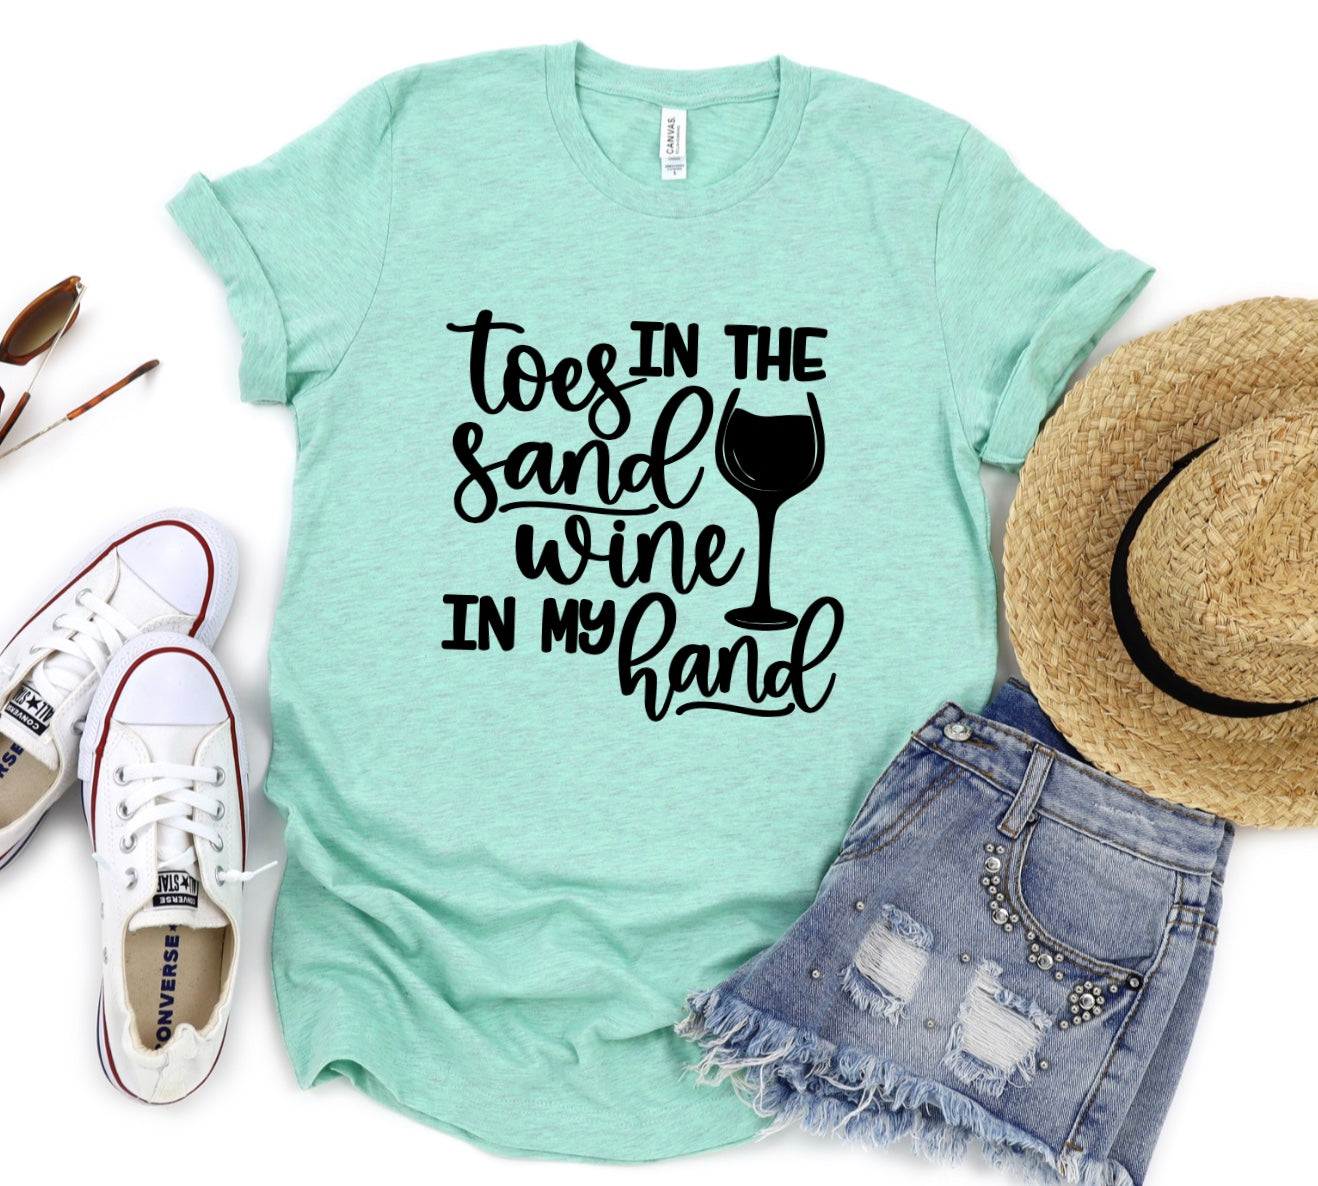 Toes in the sand wine in my hand t-shirt 